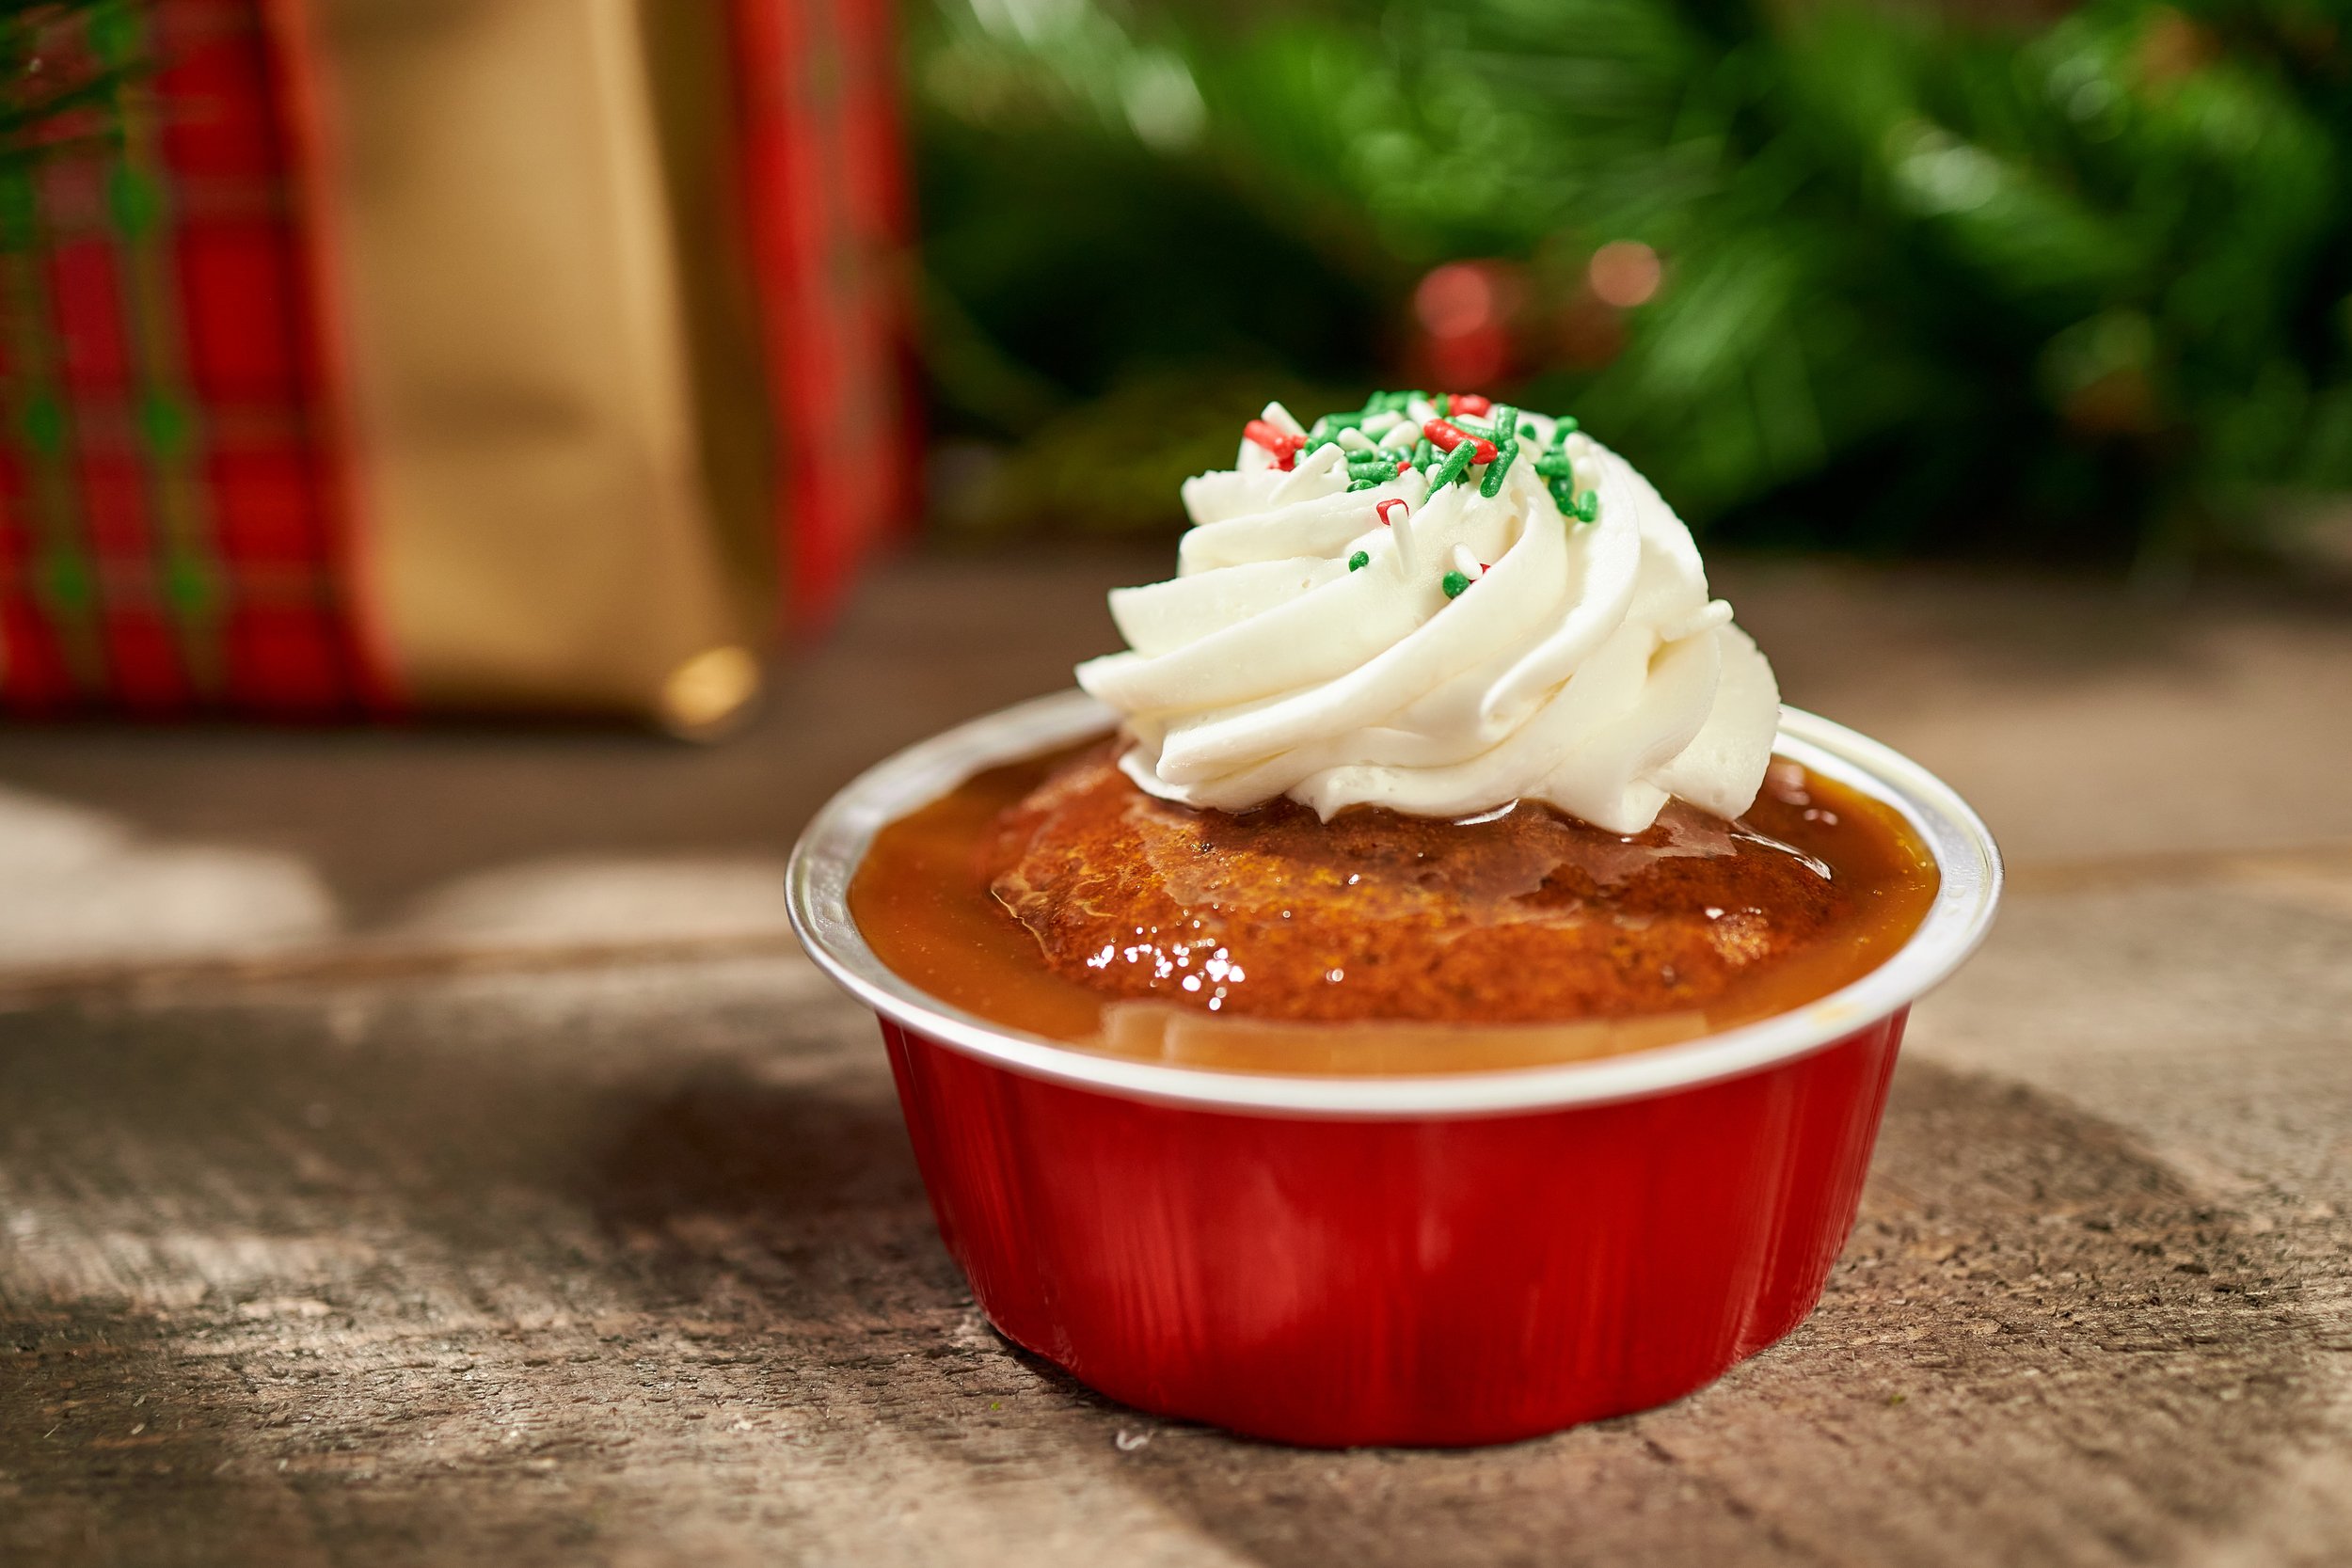 Scrooge's Sticky Toffee Pudding